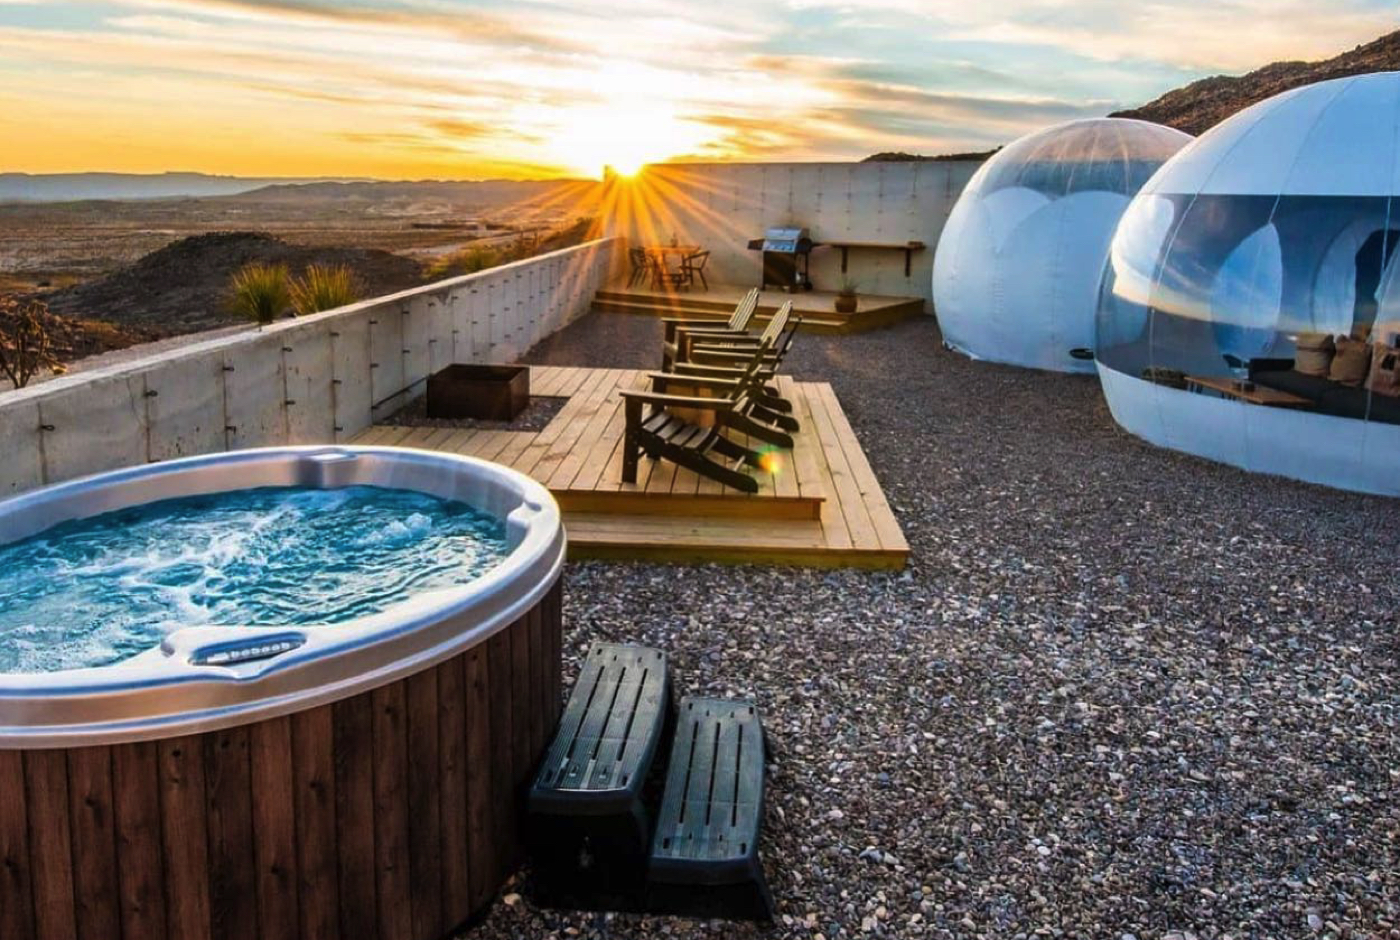 Glamping Texas: 23 Great Spots You’re Gonna Love